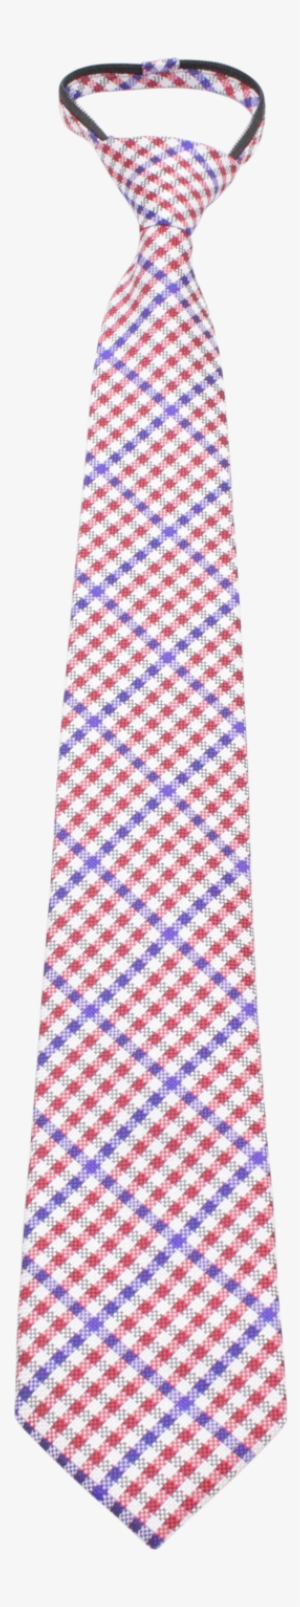 Red, White, And Blue Gingham Patterned Zipper Tie - Blue